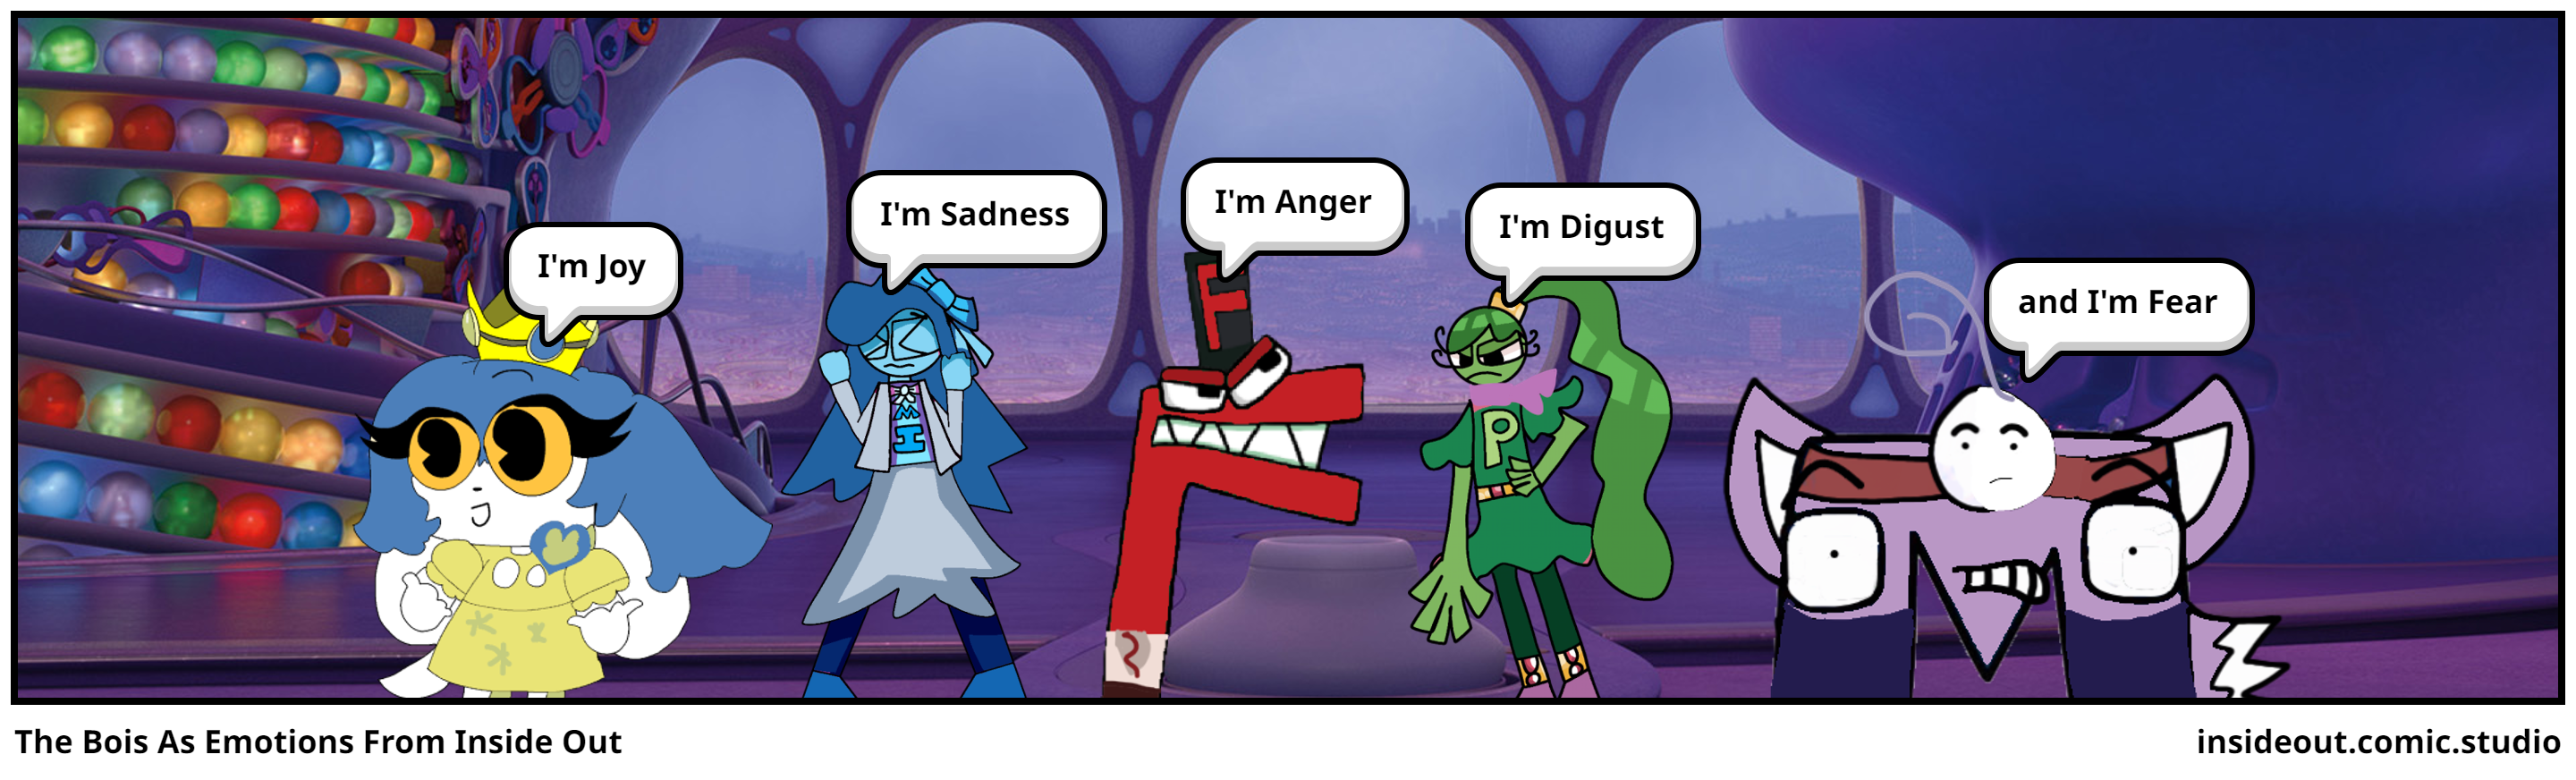 The Bois As Emotions From Inside Out